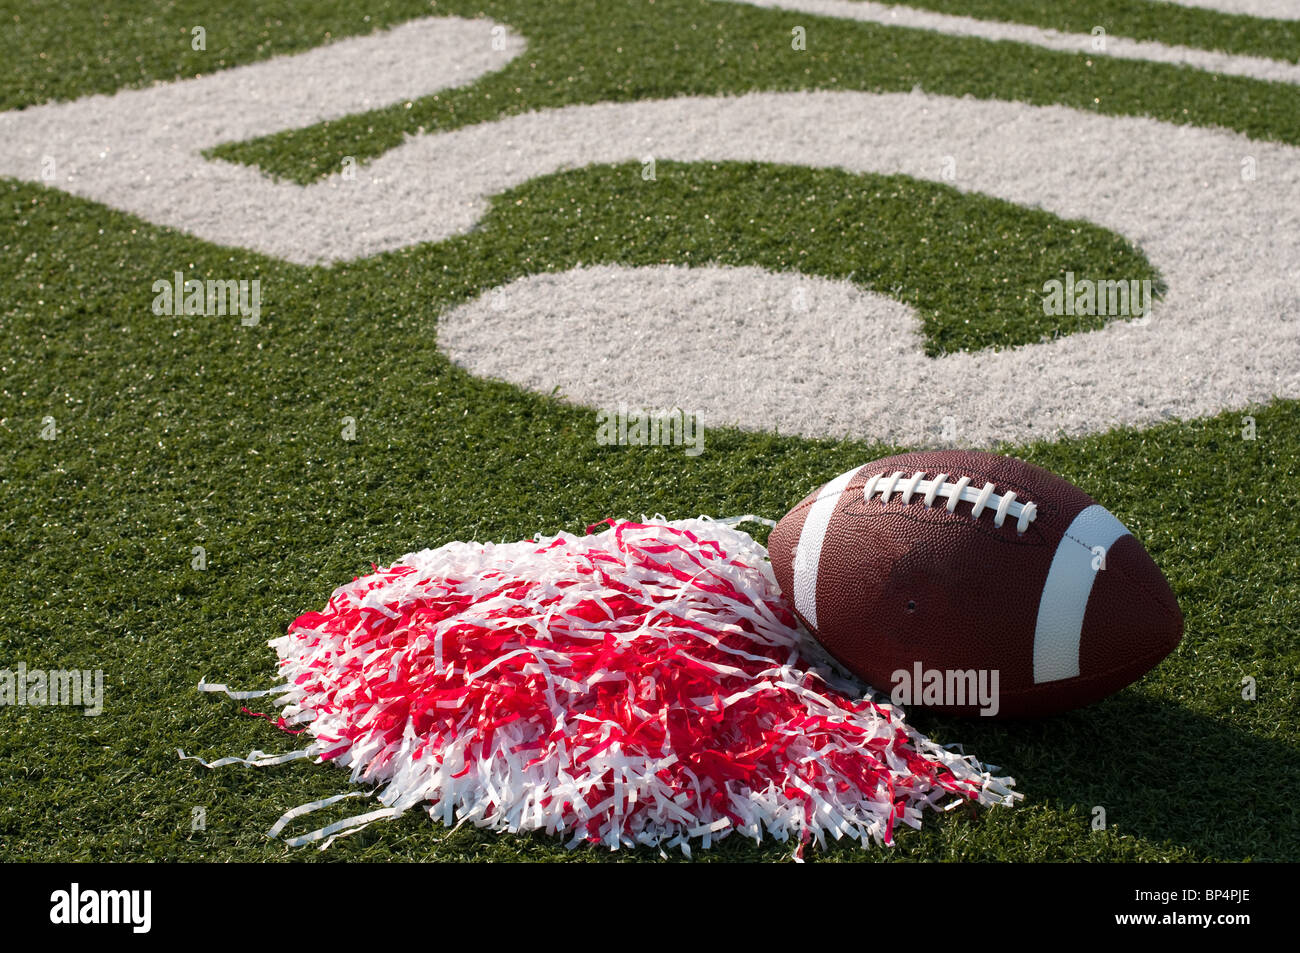 American football and pom poms on field. Stock Photo